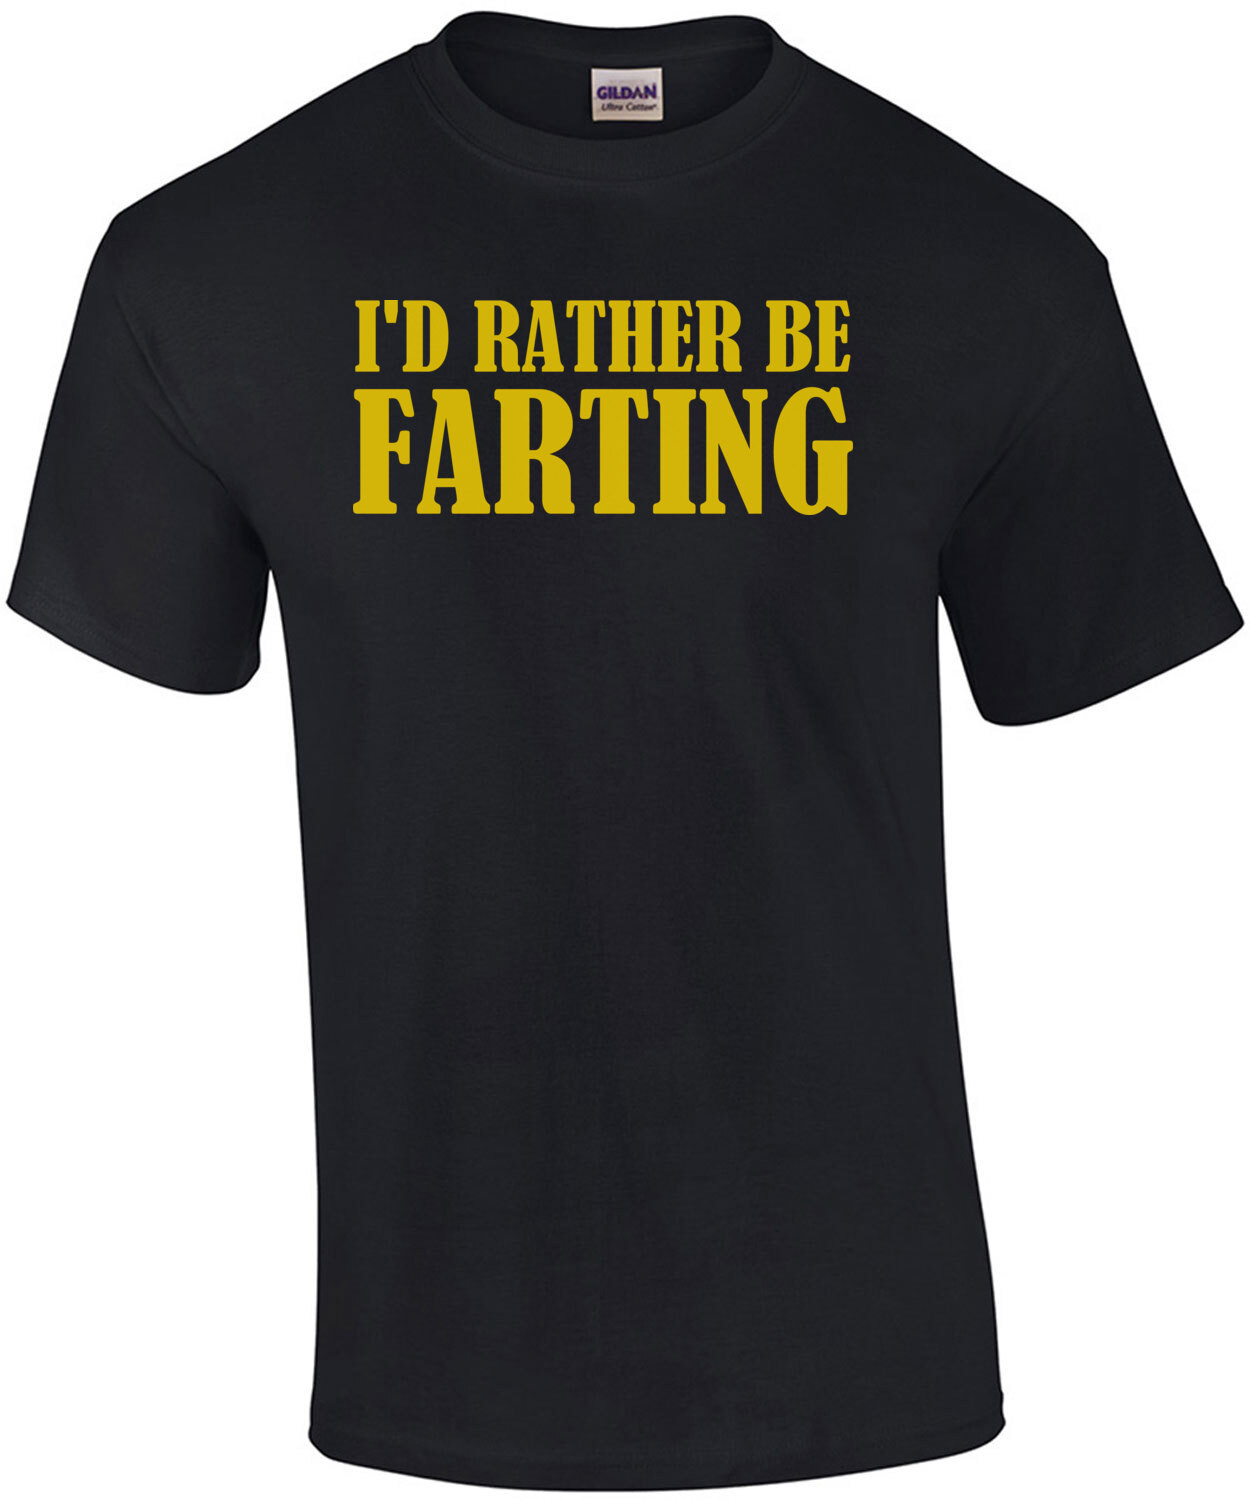 I'd rather be farting - funny t-shirt